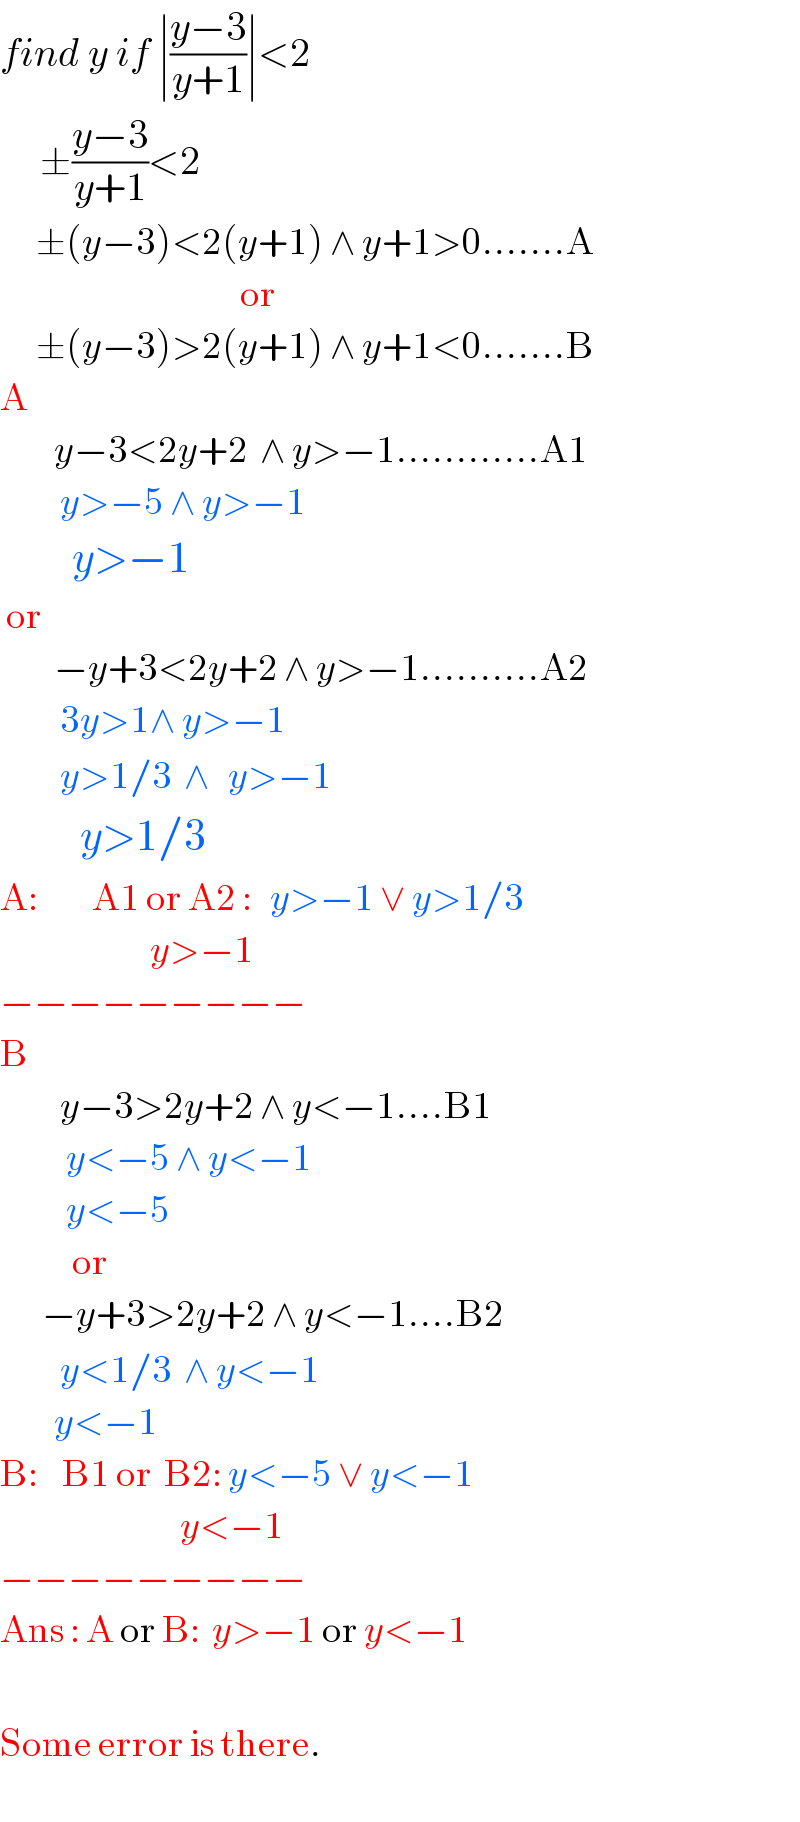 find y if ∣((y−3)/(y+1))∣<2       ±((y−3)/(y+1))<2        ±(y−3)<2(y+1) ∧ y+1>0.......A                                          or        ±(y−3)>2(y+1) ∧ y+1<0.......B  A           y−3<2y+2  ∧ y>−1............A1            y>−5 ∧ y>−1           y>−1   or           −y+3<2y+2 ∧ y>−1..........A2            3y>1∧ y>−1            y>1/3  ∧   y>−1            y>1/3    A:         A1 or A2 :   y>−1 ∨ y>1/3                            y>−1  −−−−−−−−−  B            y−3>2y+2 ∧ y<−1....B1             y<−5 ∧ y<−1             y<−5              or         −y+3>2y+2 ∧ y<−1....B2            y<1/3  ∧ y<−1           y<−1  B:    B1 or  B2: y<−5 ∨ y<−1                                y<−1  −−−−−−−−−  Ans : A or B:  y>−1 or y<−1                           Some error is there.  